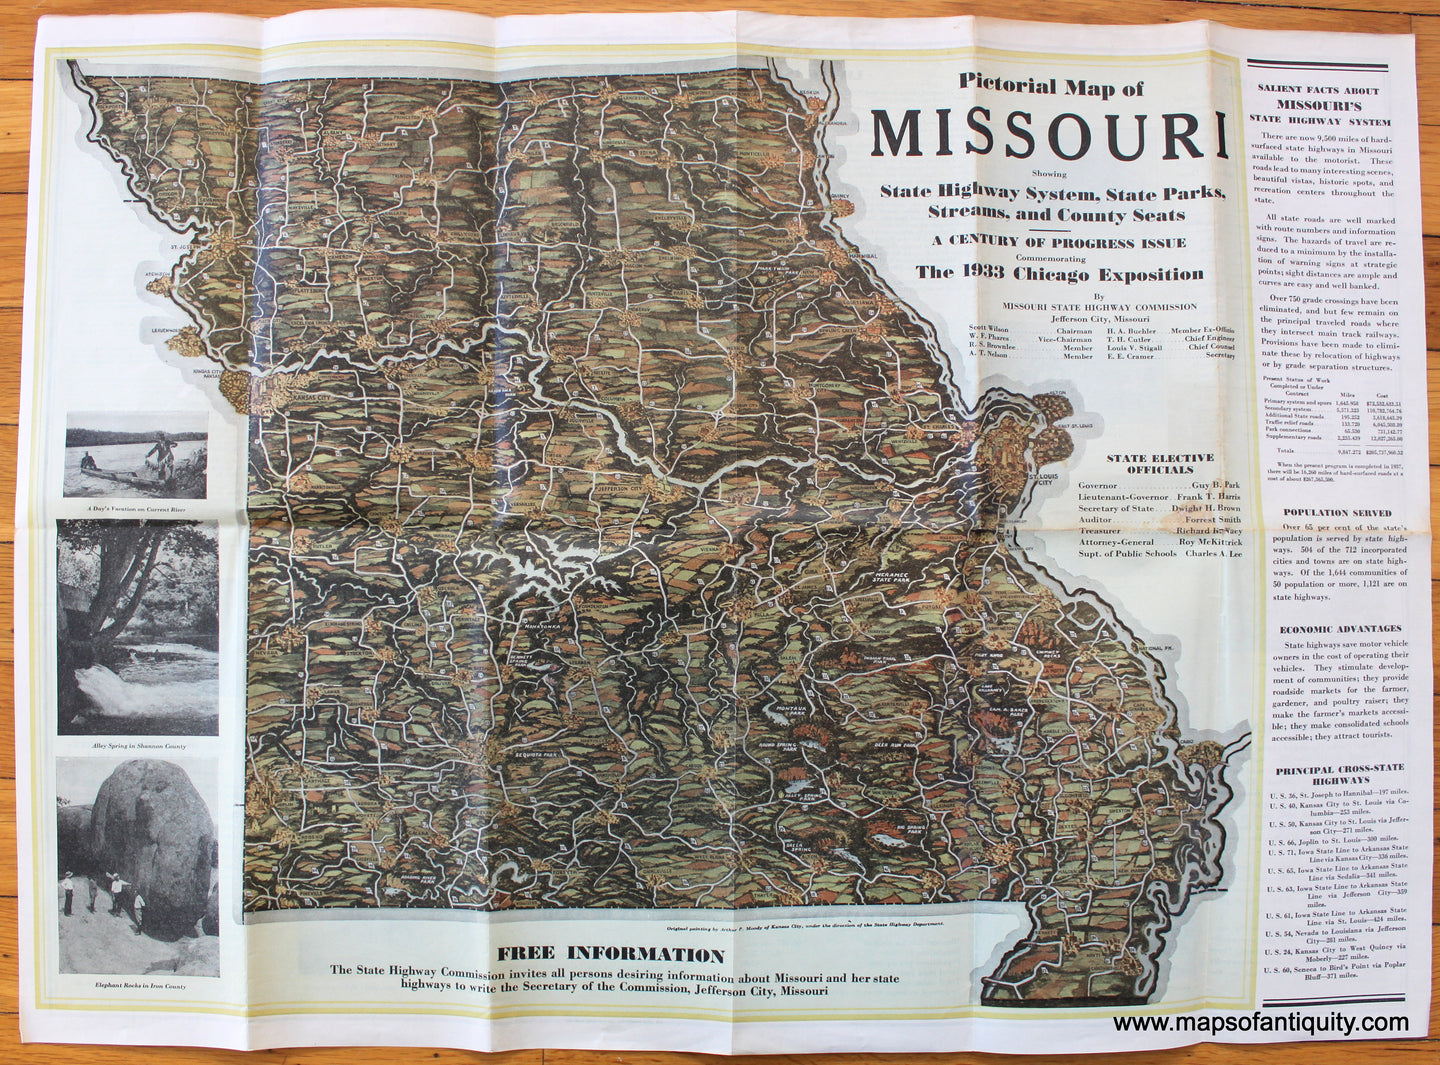 Antique-Printed-Color-Pictorial-Map-Pictorial-Map-of-Missouri-1933-Arthur-Moody-Missouri-State-Highway-Commission-Midwest-Missouri-1900s-1930s-20th-century-Maps-of-Antiquity